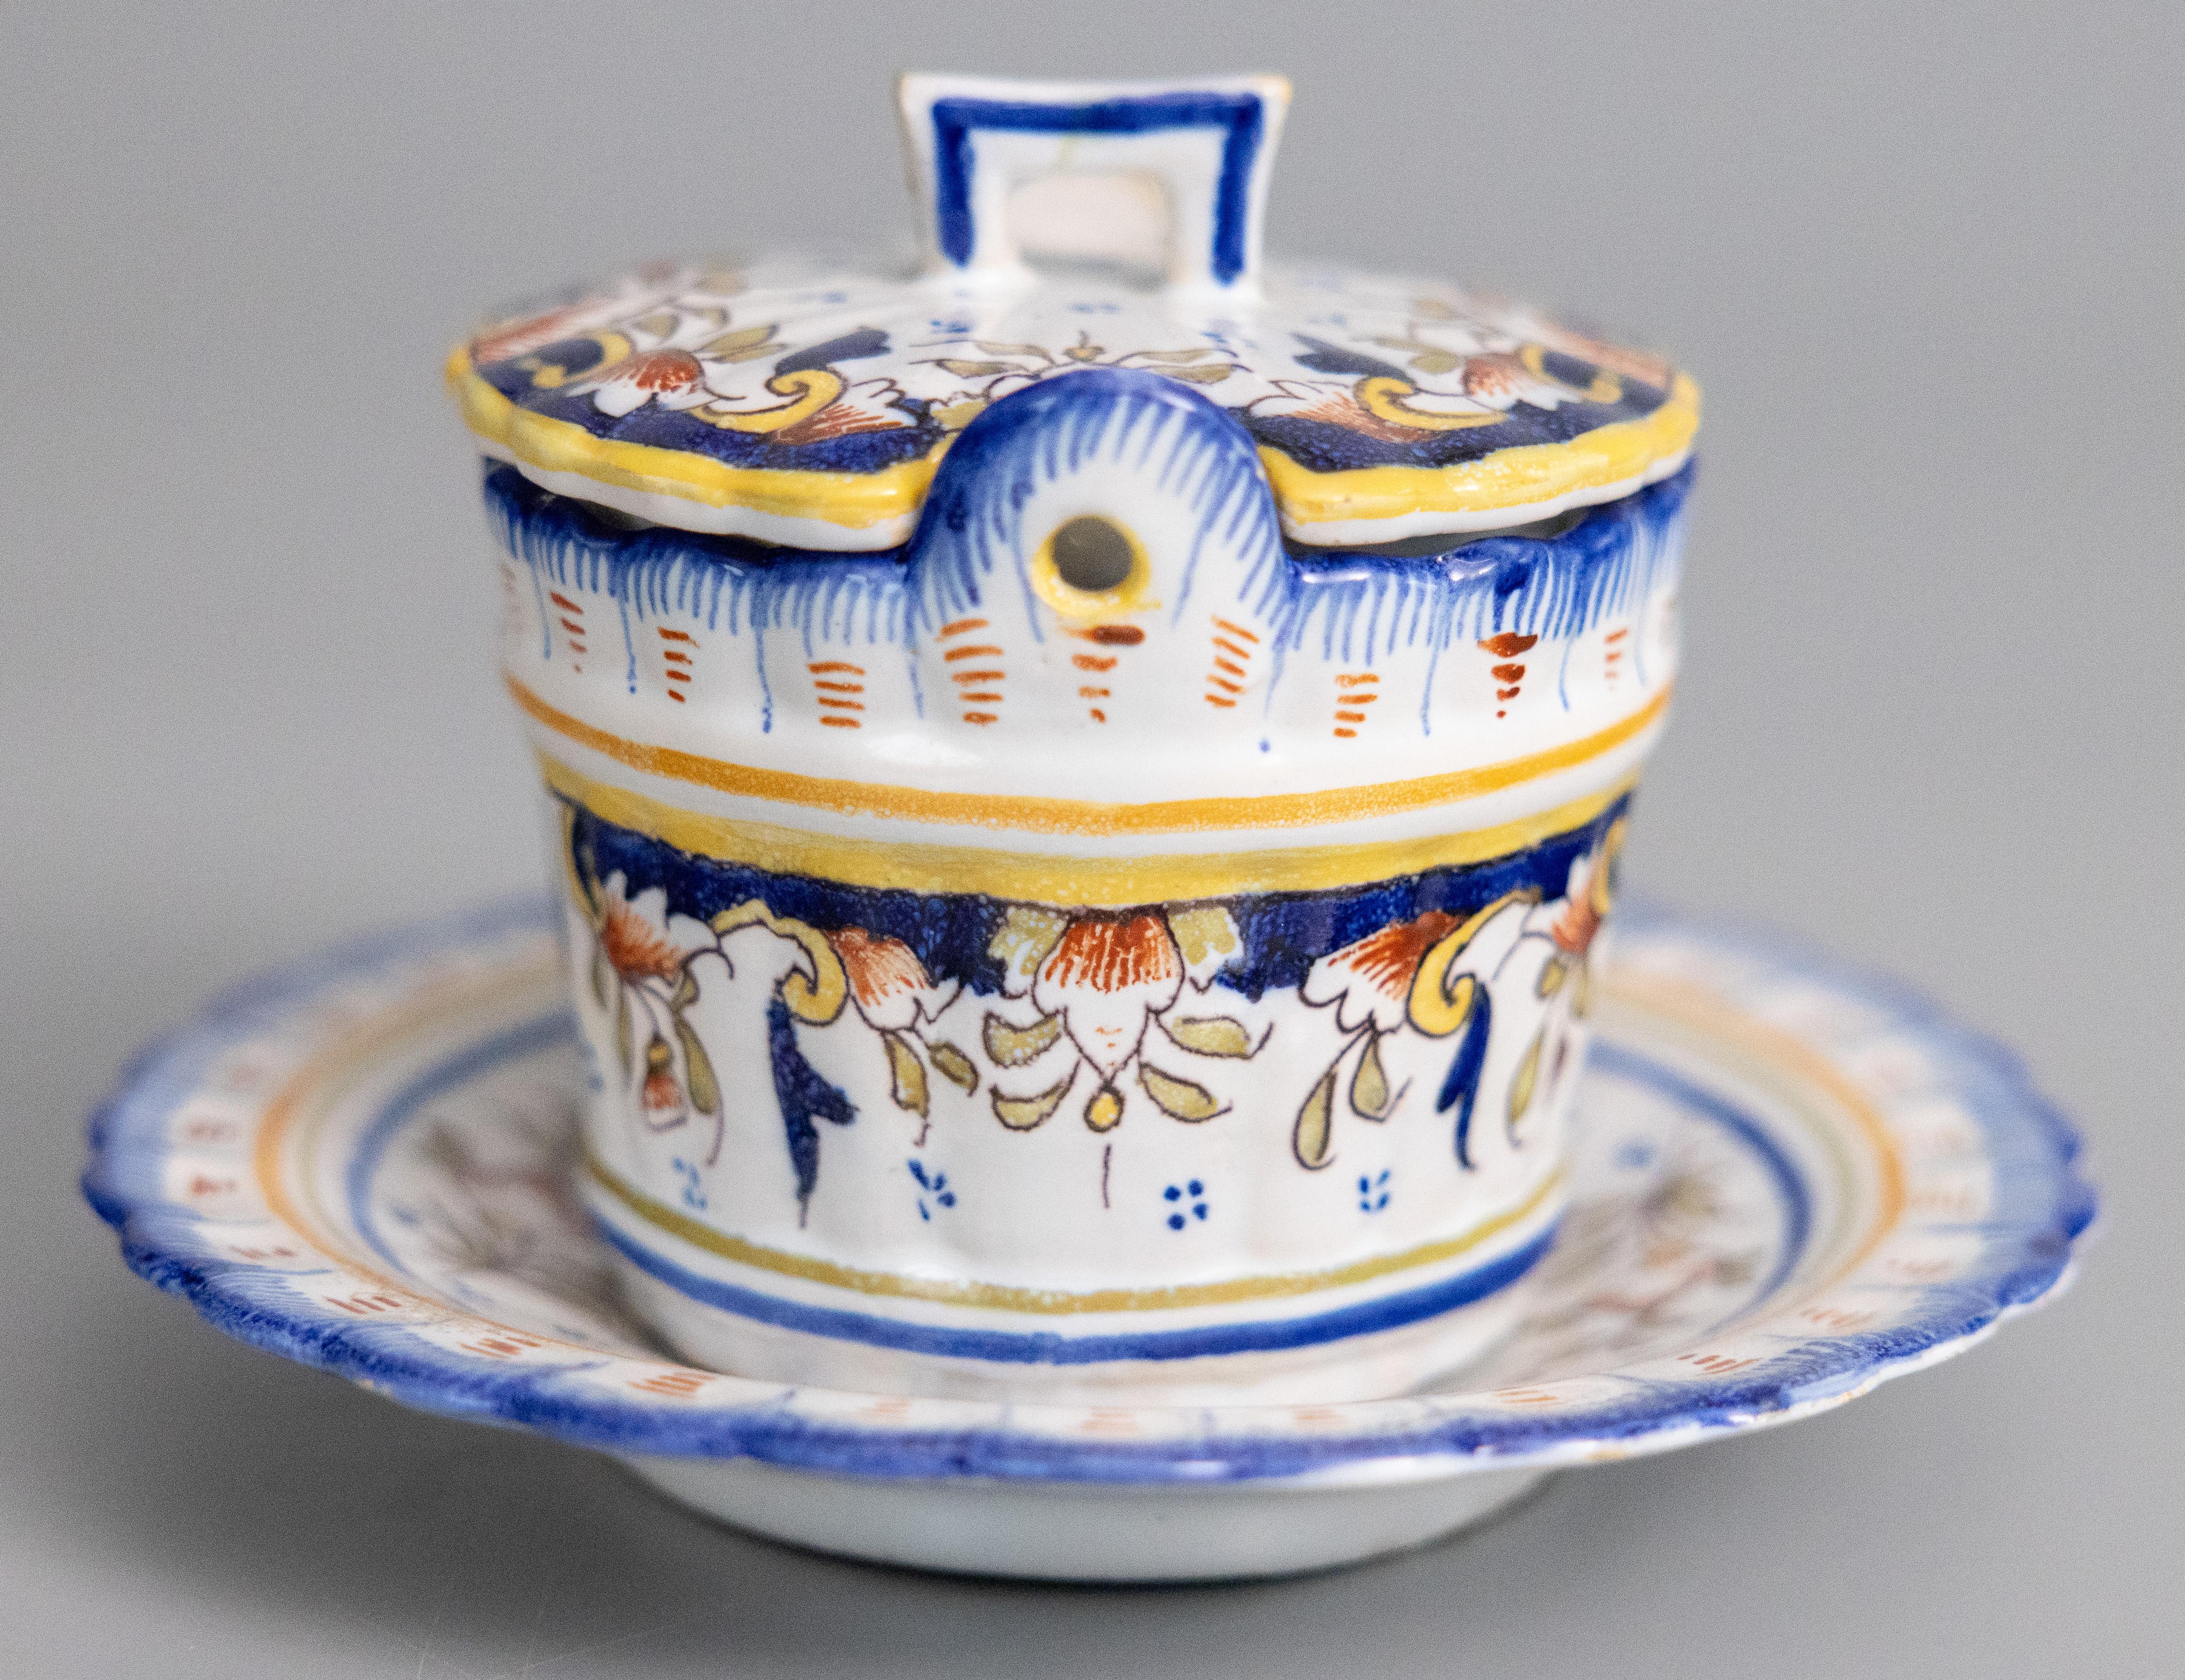 Early 20th Century Antique French Faience Desvres Lidded Butter Bowl Dish, circa 1900 For Sale